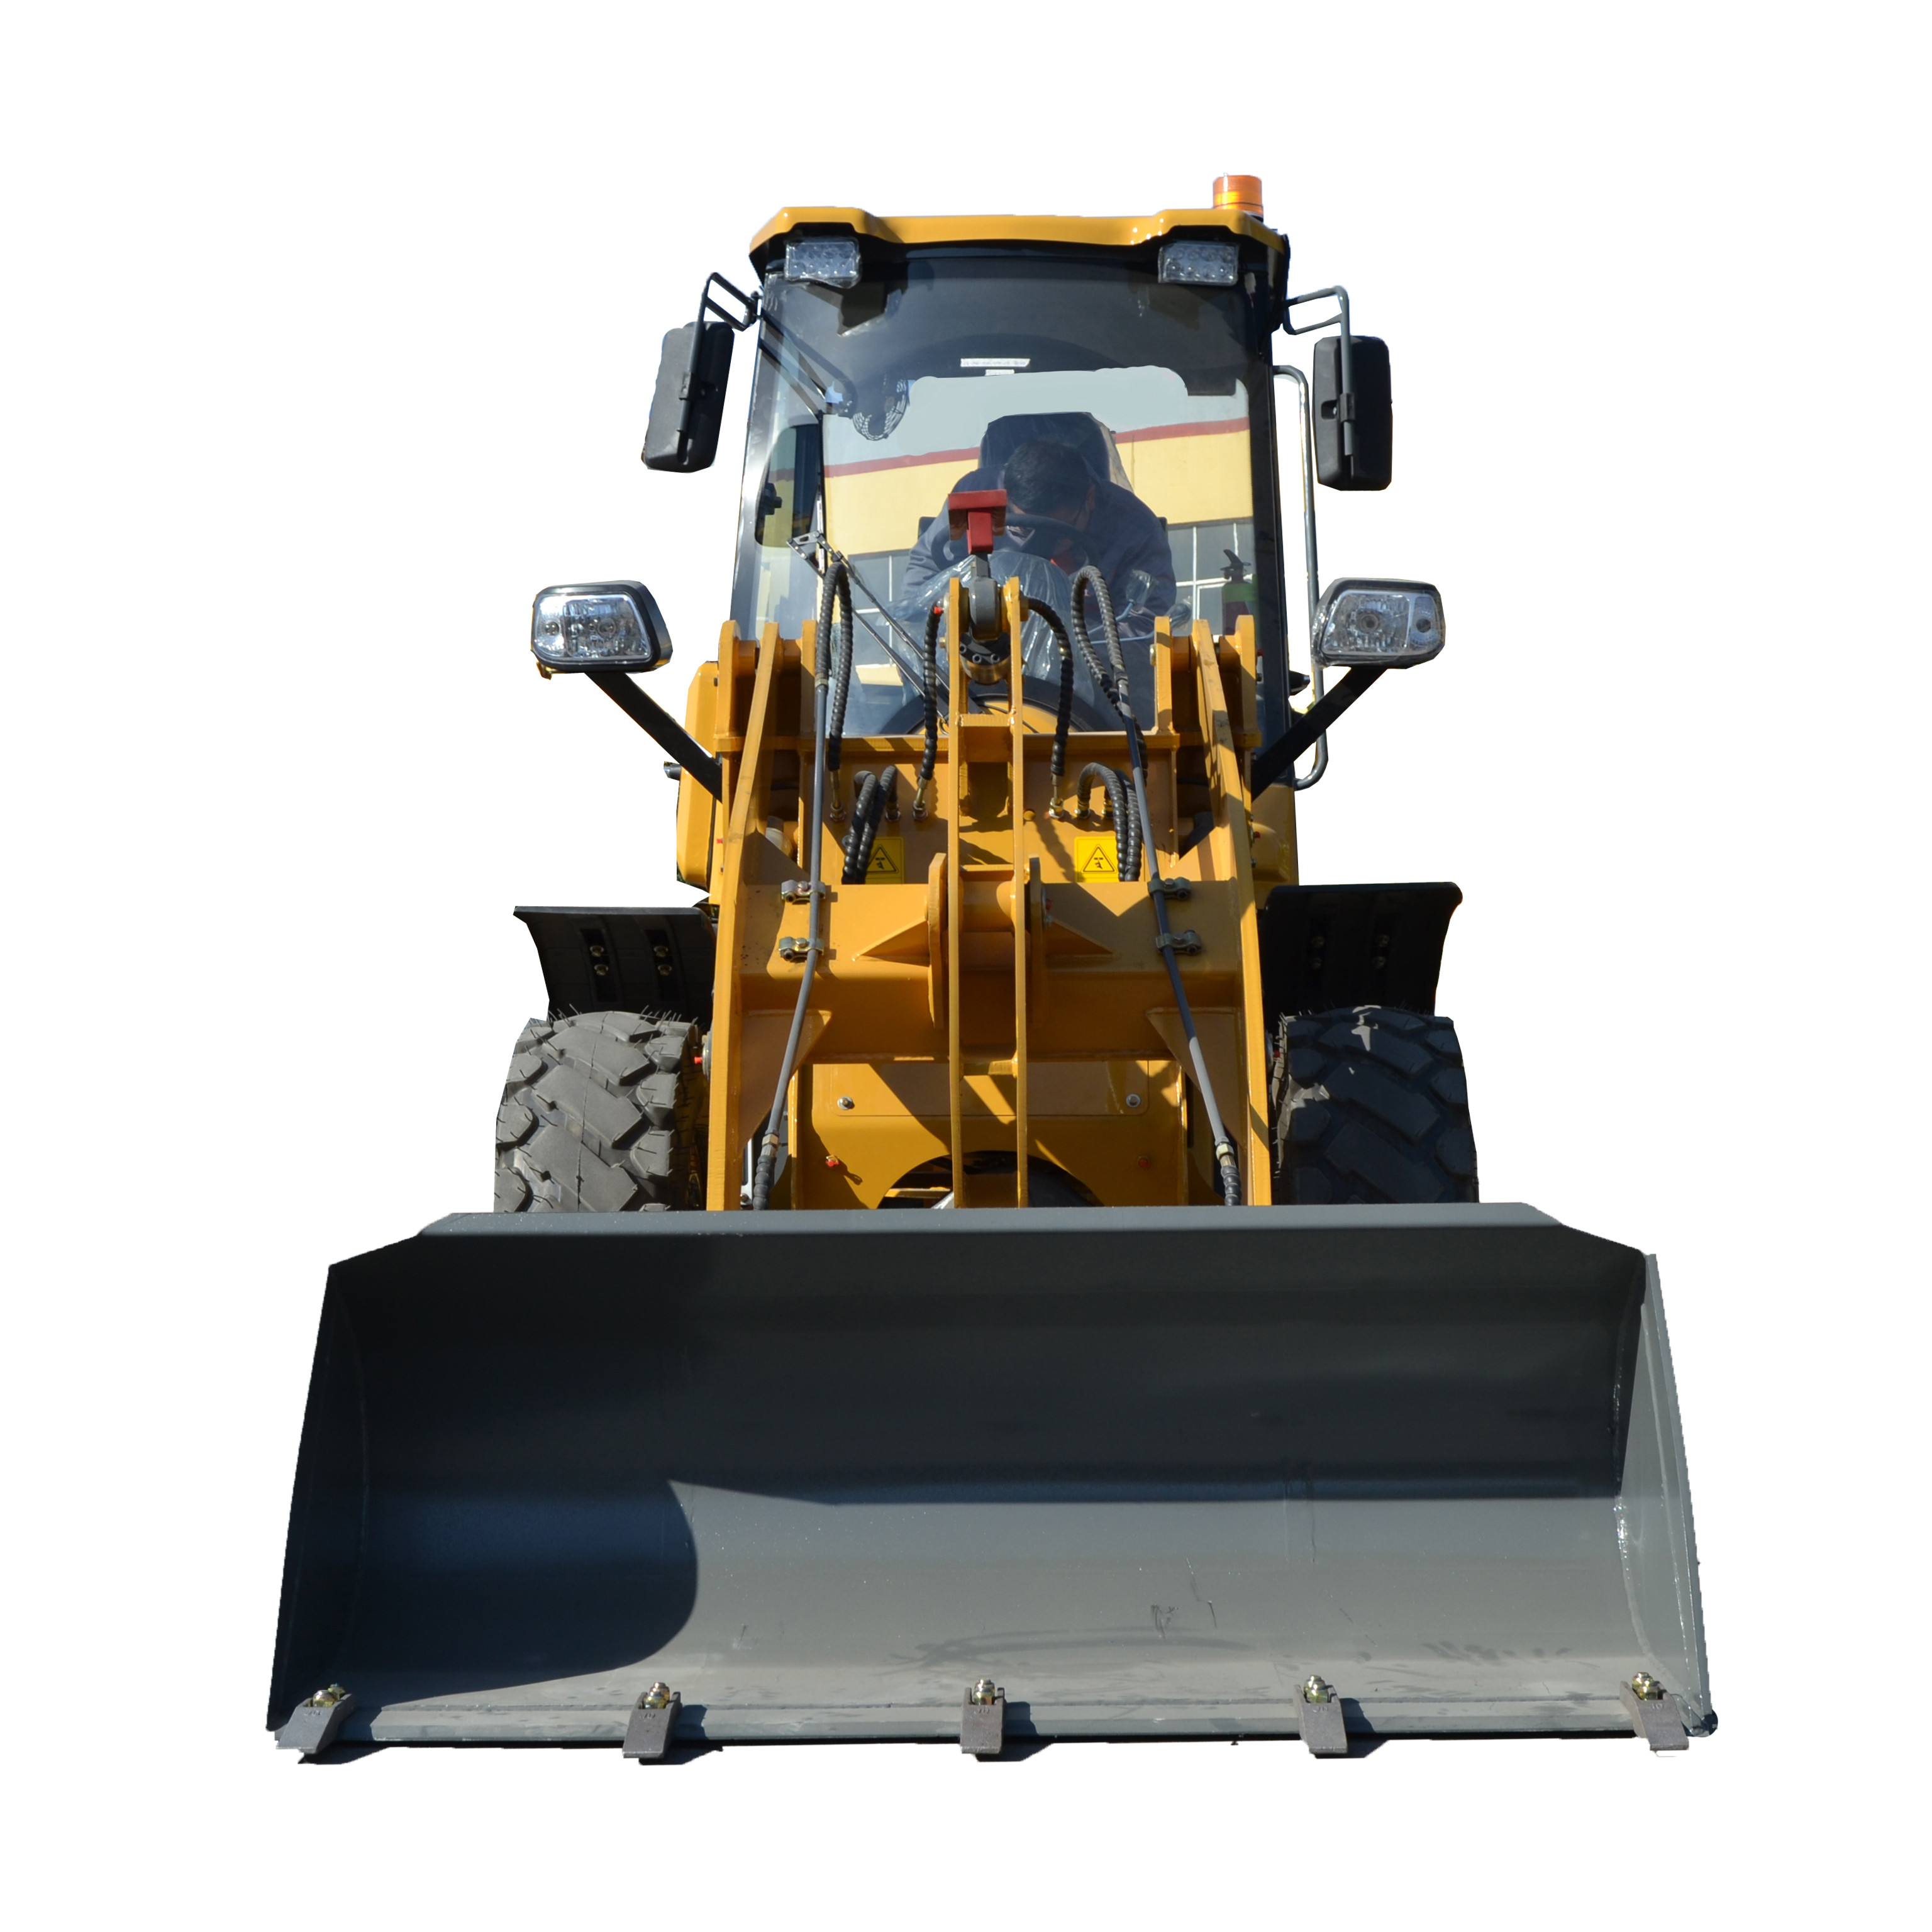 Optional attachments durable mini wheel loader for both construction and agriculture